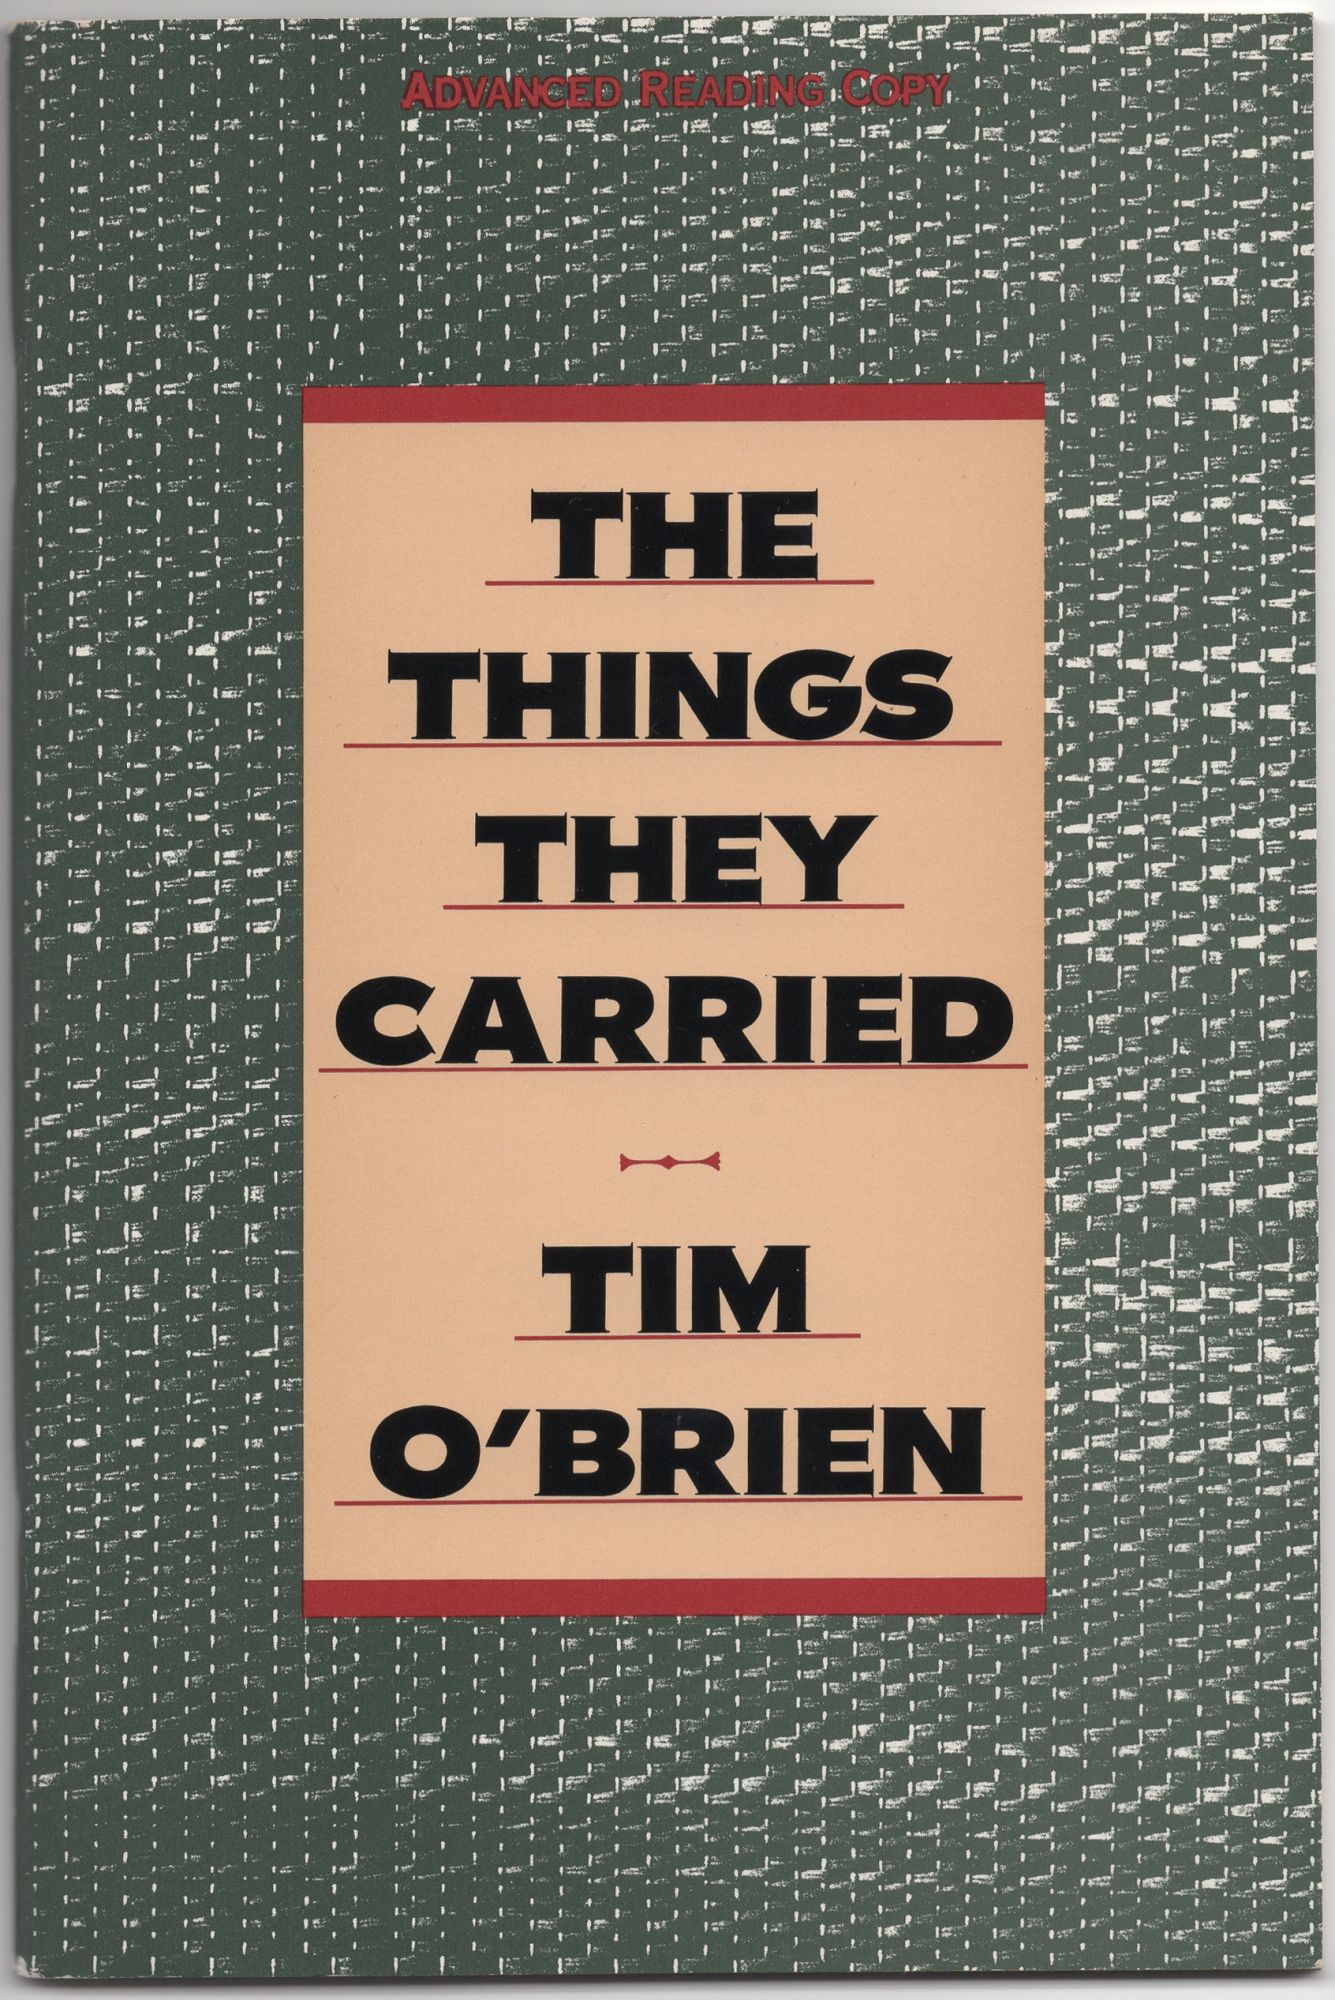 They　Things　Selection　The　Tim　A　O'BRIEN　from　Carried